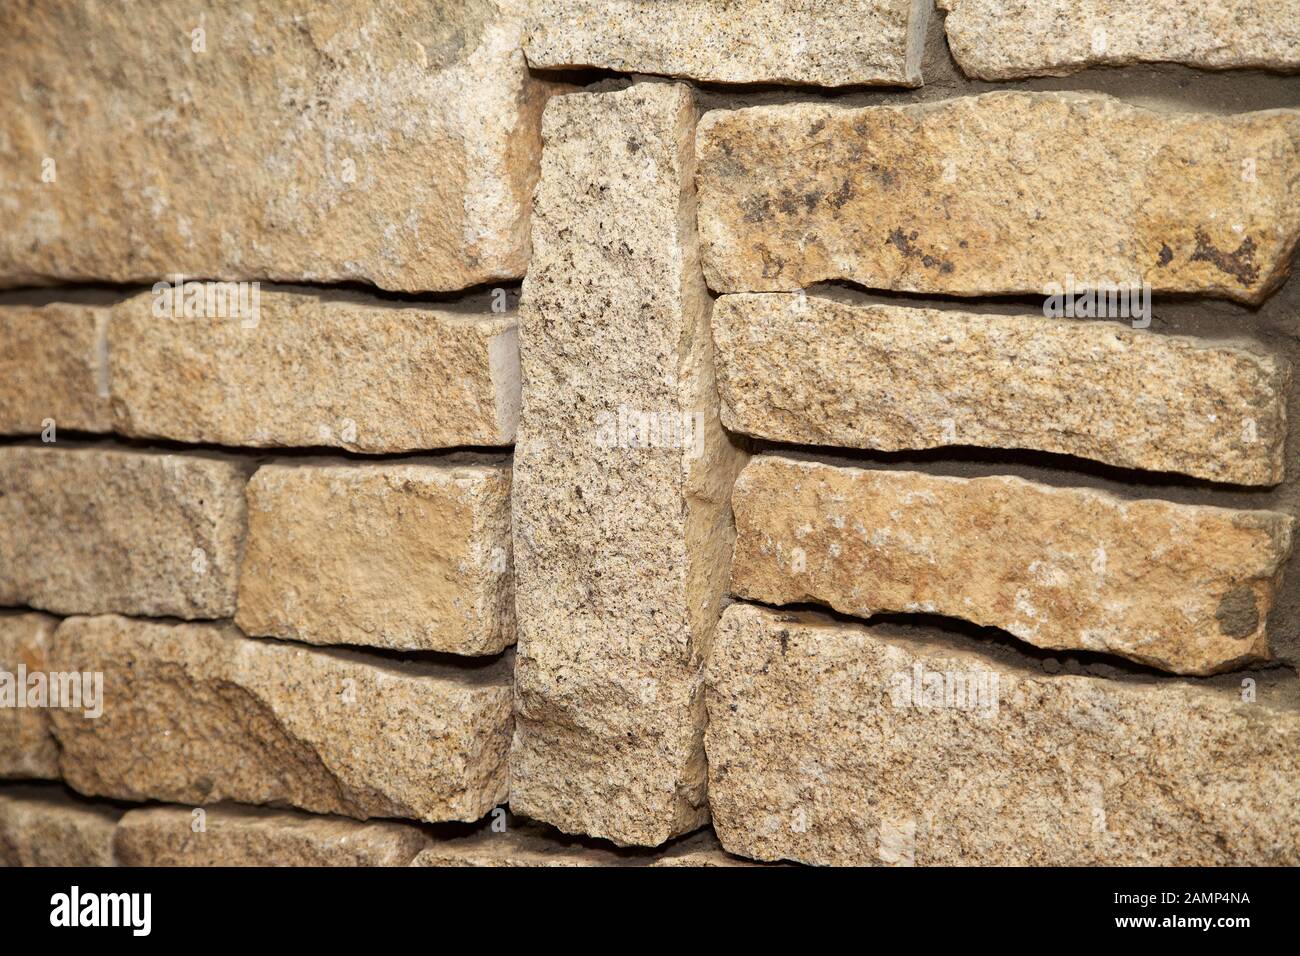 Close-up shot of a stone wall made of cut sandstone blocks. Stock Photo